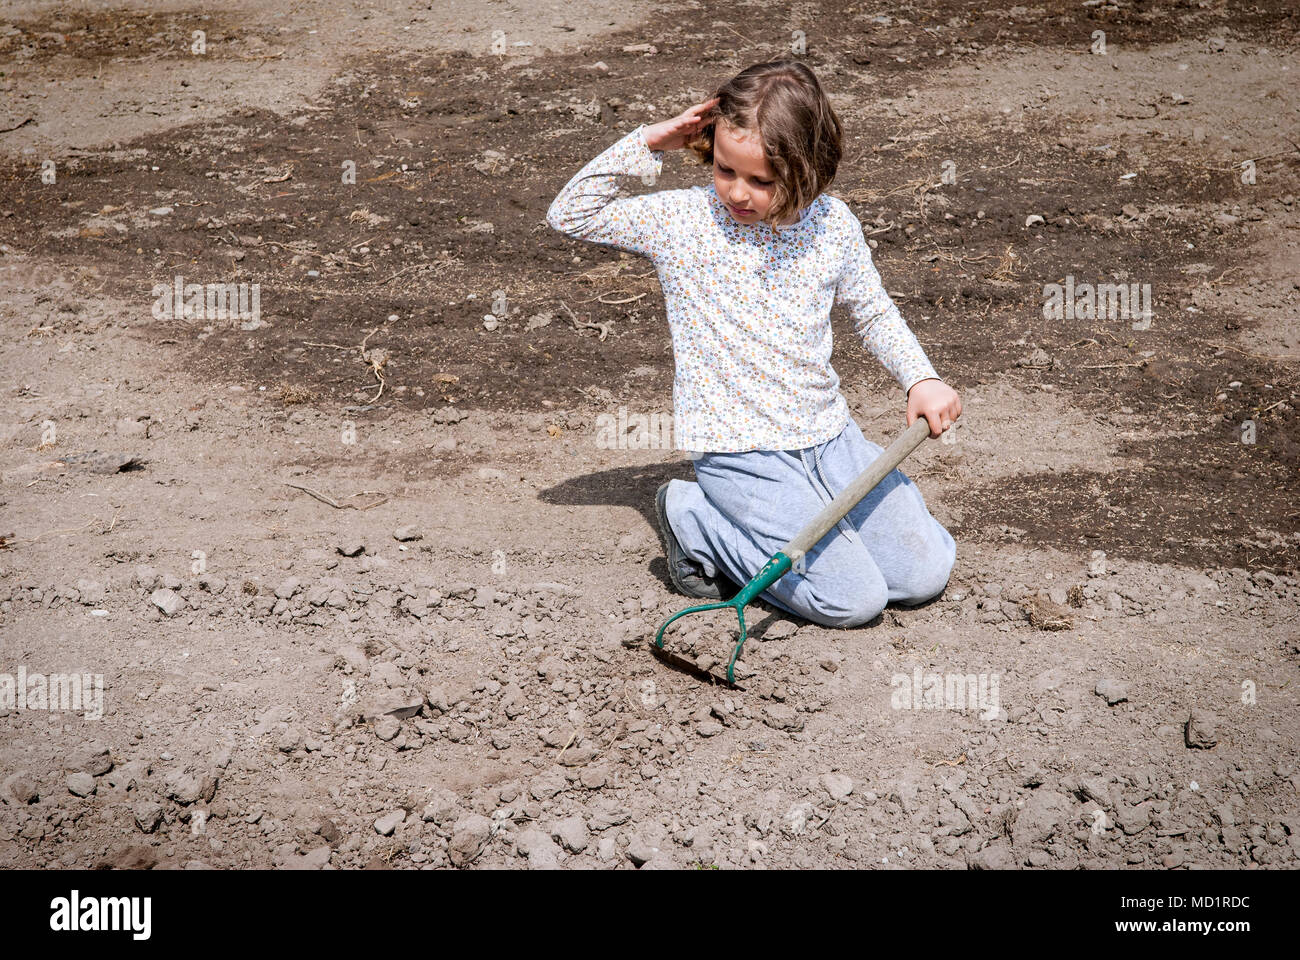 Girl digging in dry organic soil by hoe. Stock Photo